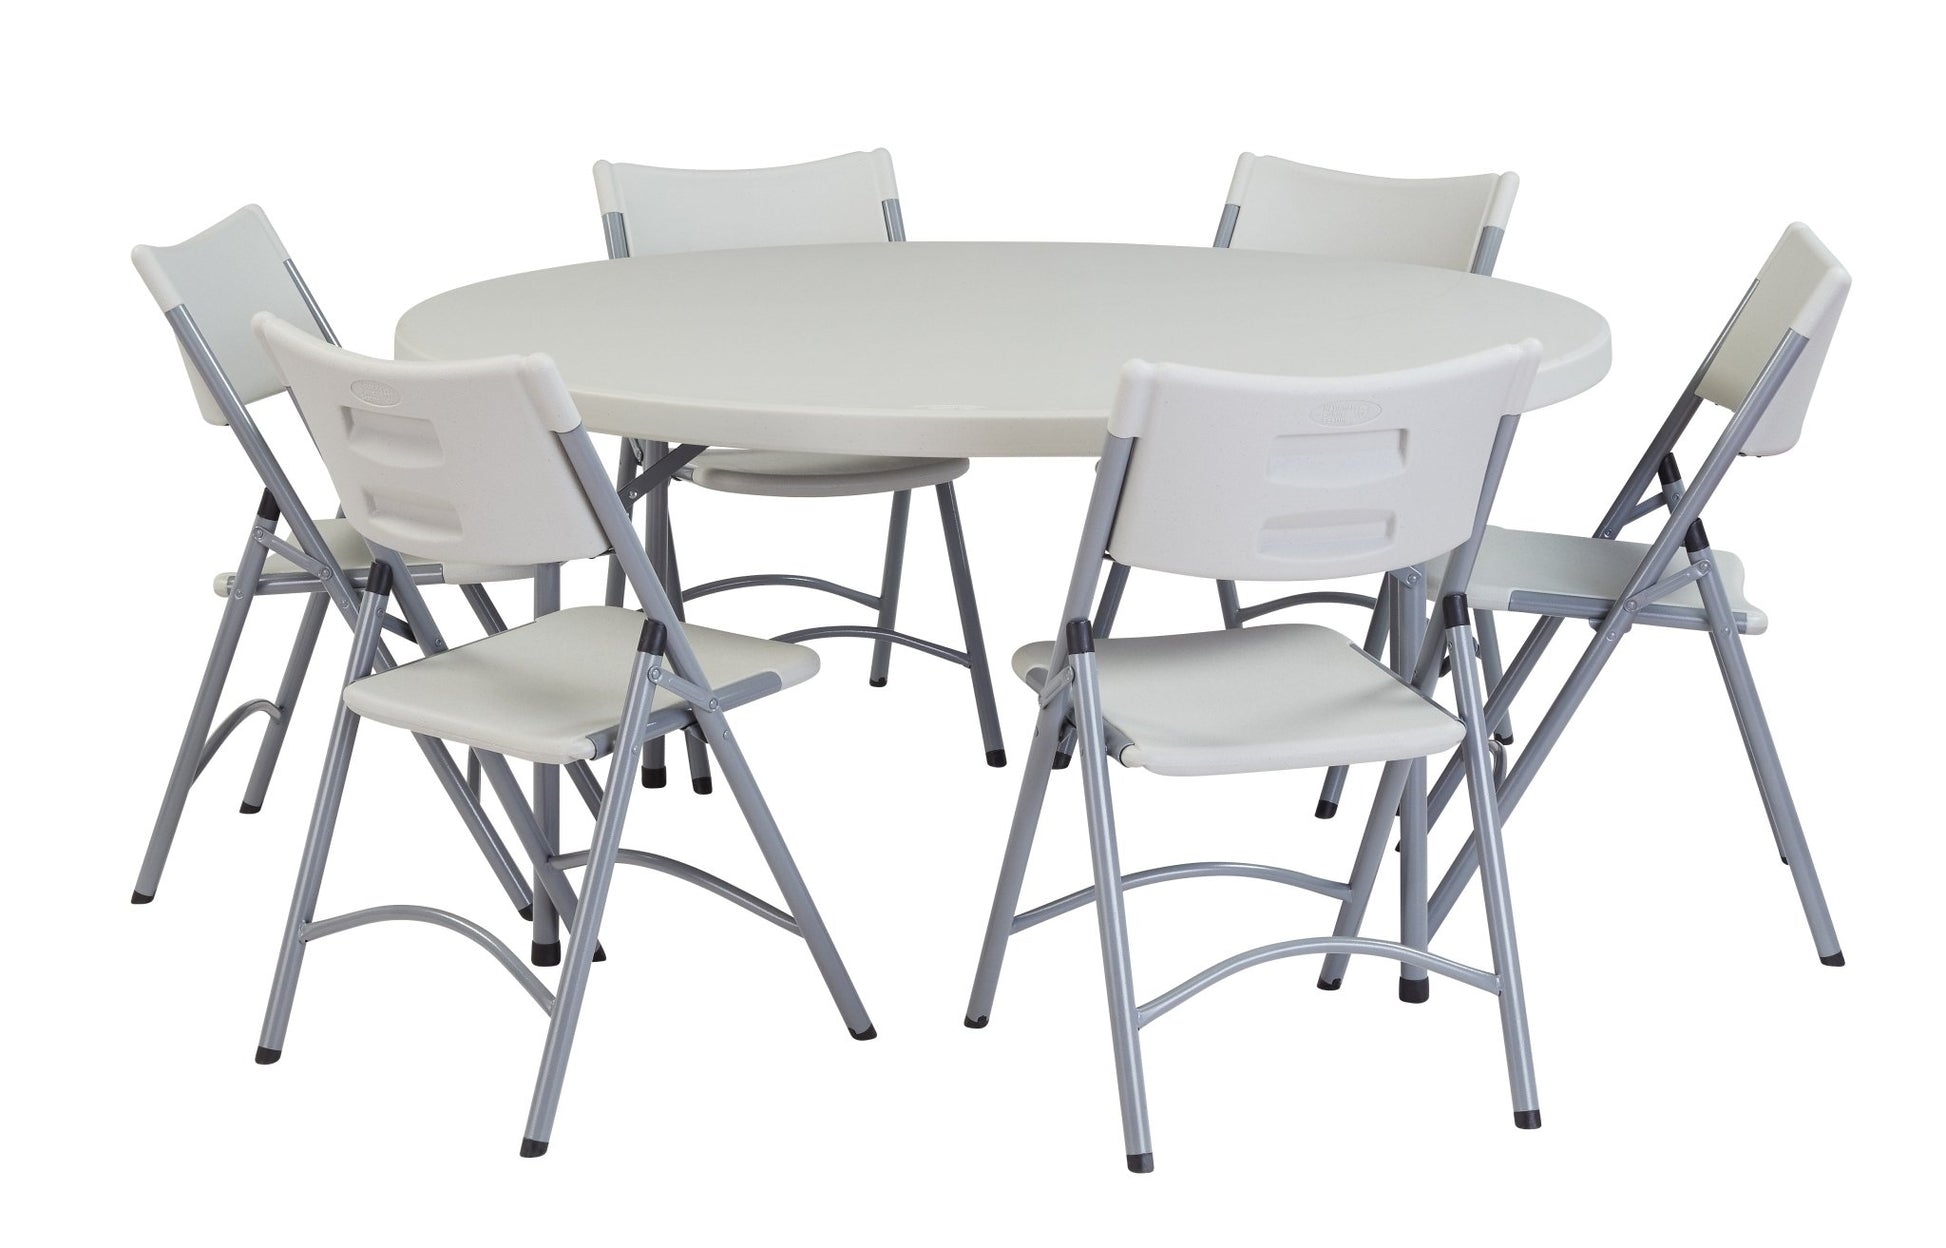 NPS Round Plastic Top Folding Table 60" Round (National Public Seating NPS-BT60R) - SchoolOutlet